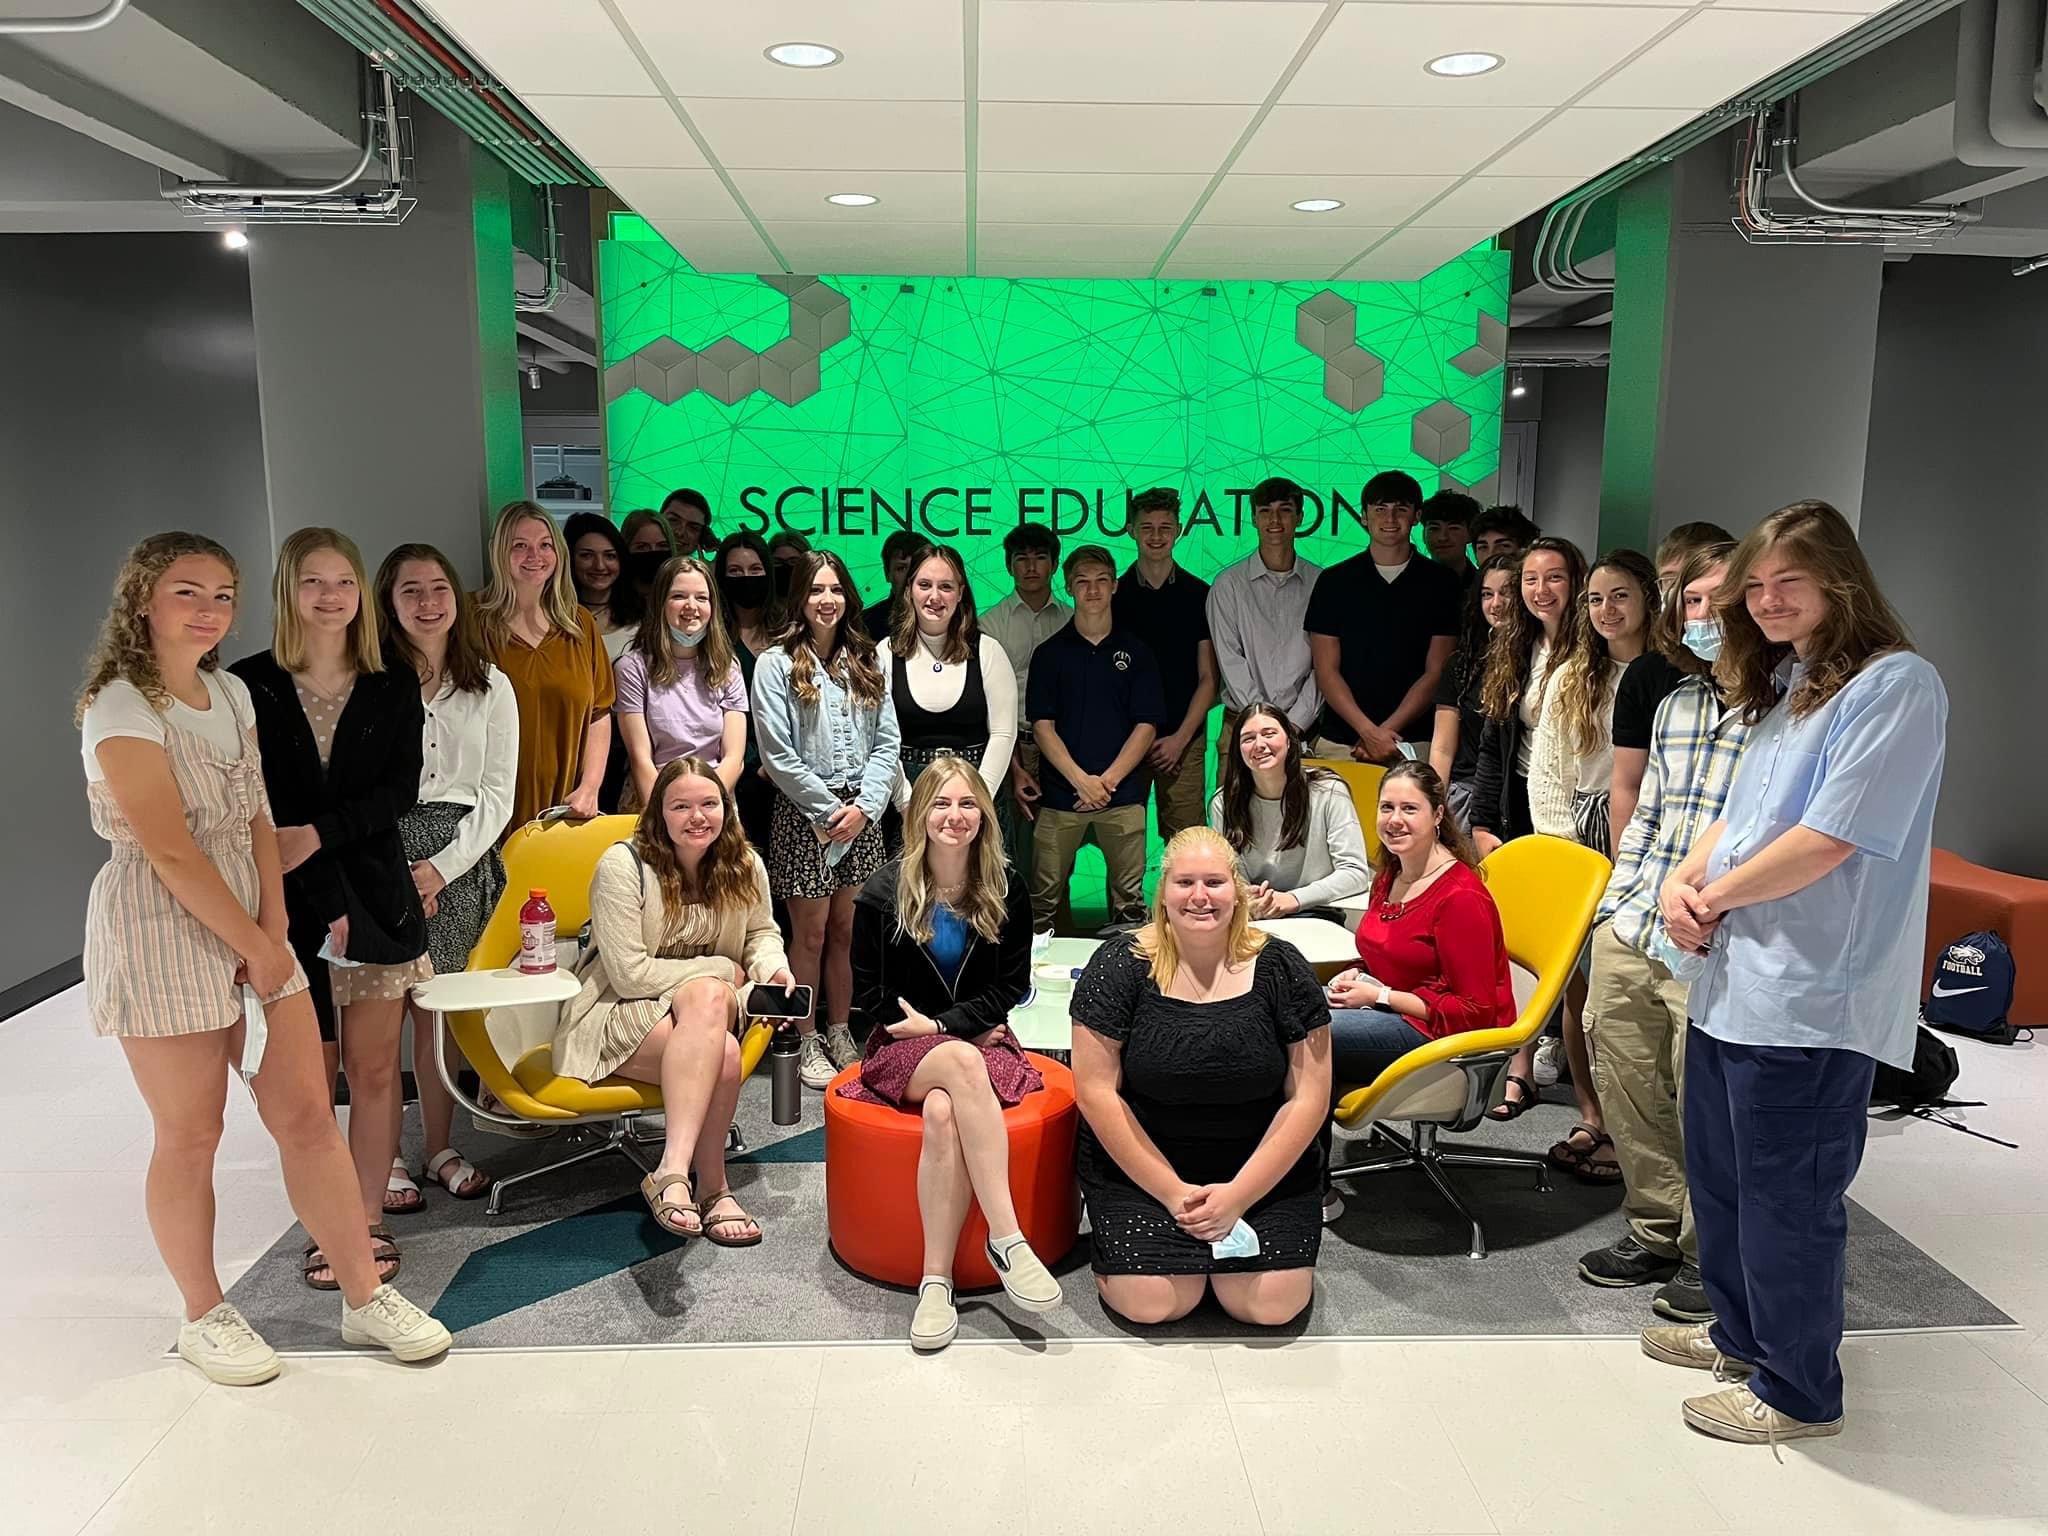 Students standing in a semi-circle around the center of the science education room. There is a neon green wall that lights up the background of the image, and the wall reads :science education".